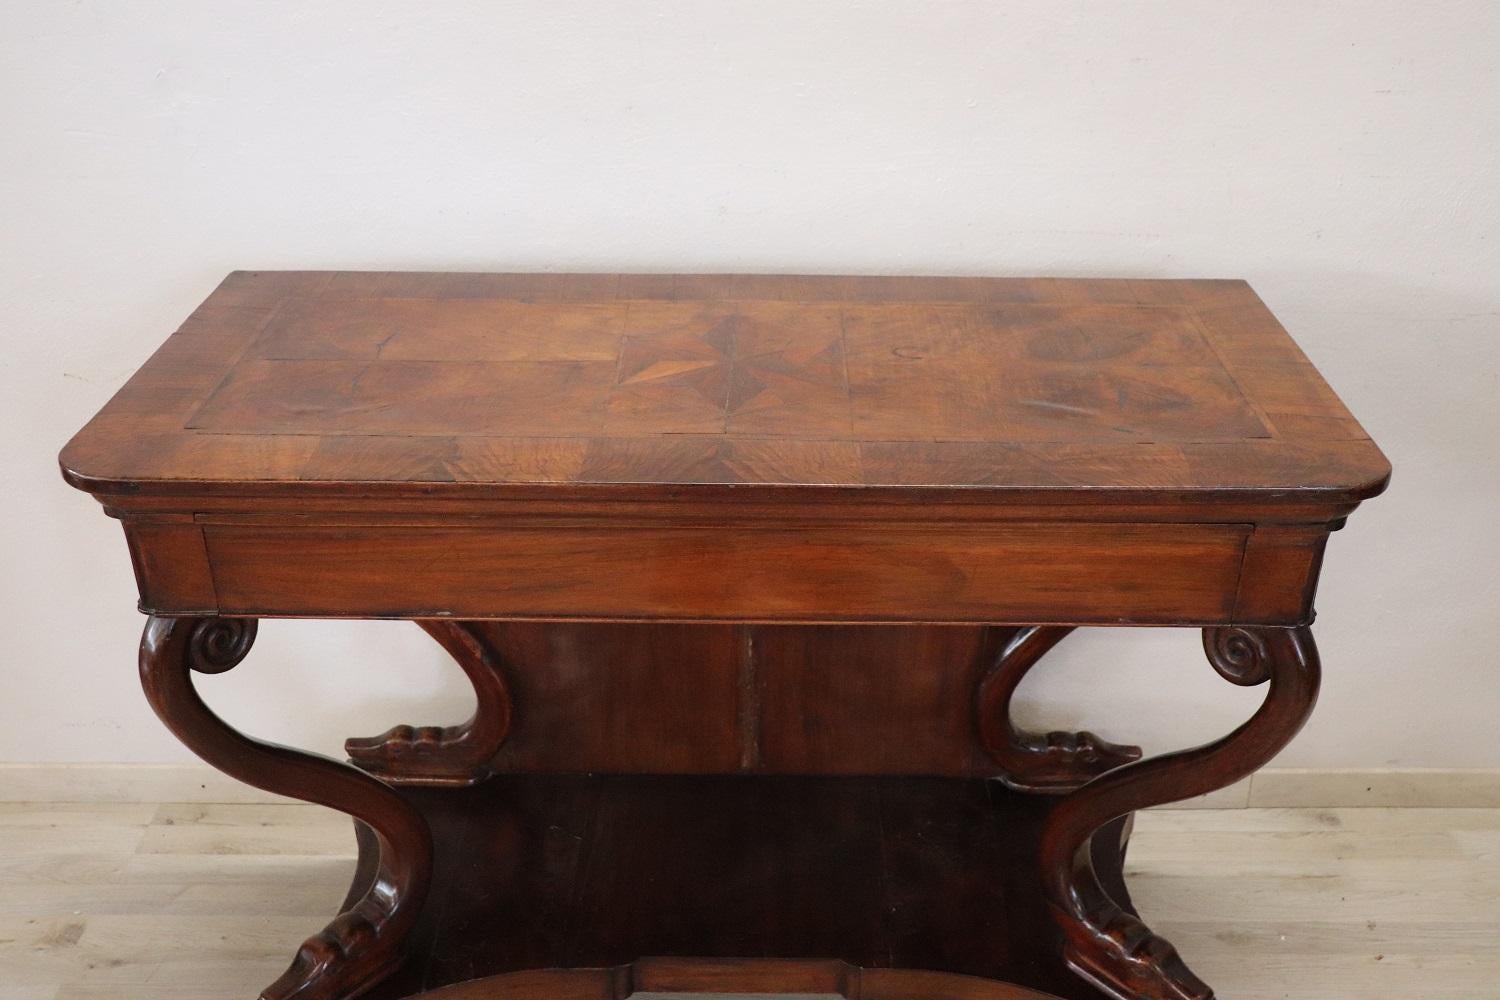 Antique console table Charles X 1825s. The console is made of solid carved walnut. On the front a comfortable drawer. The top has a refined inlaid star decoration. The two front decorative legs are moved and have the shape of a triton. Rare due to